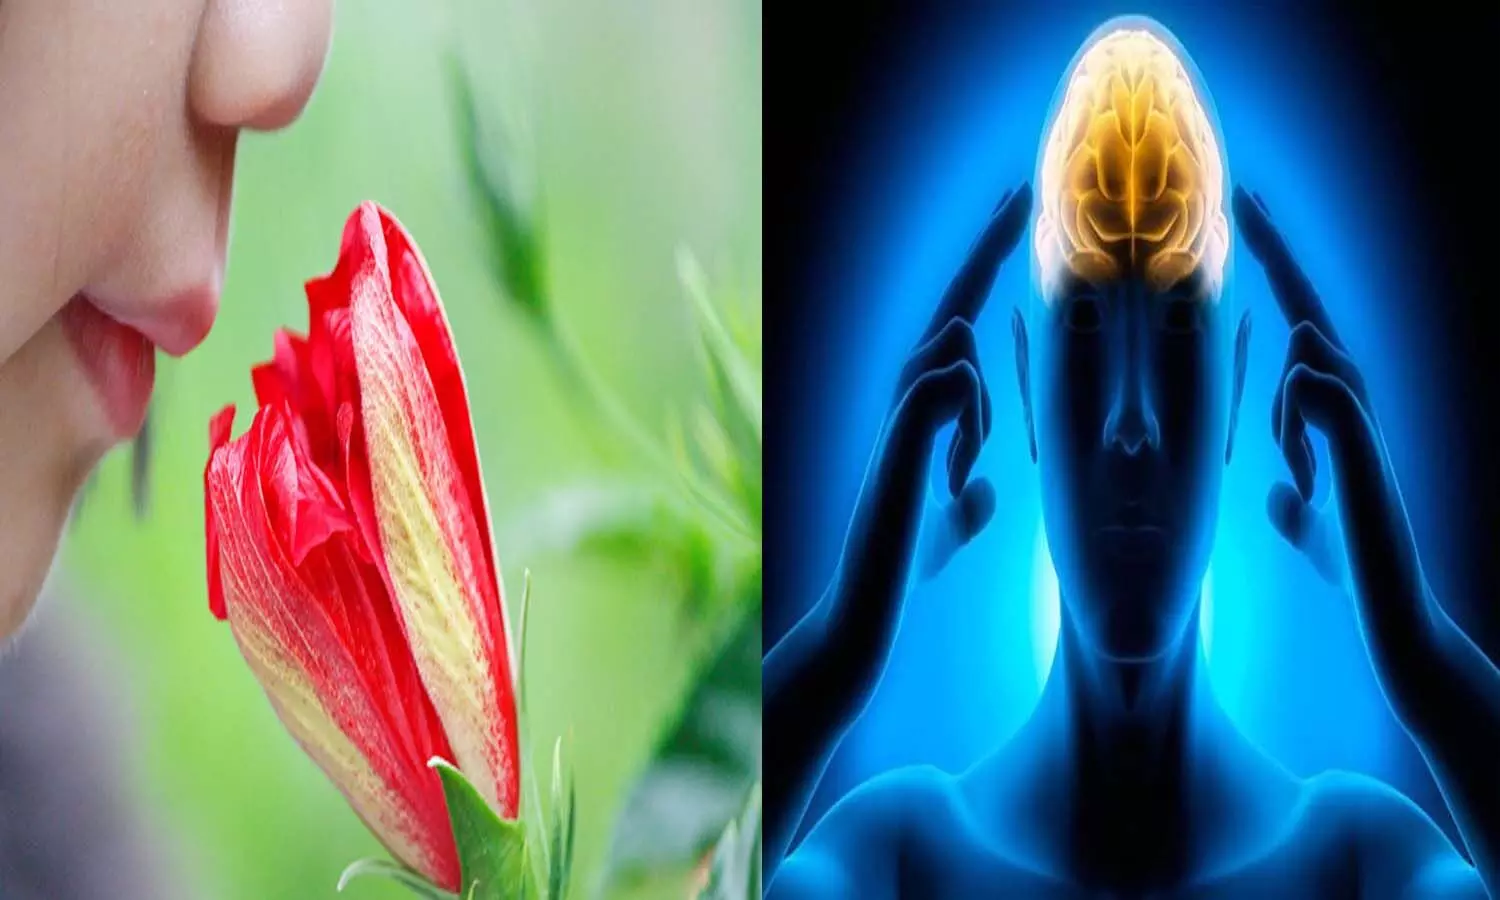 Your ability to smell is linked to the state of your brain, research reports are shocking